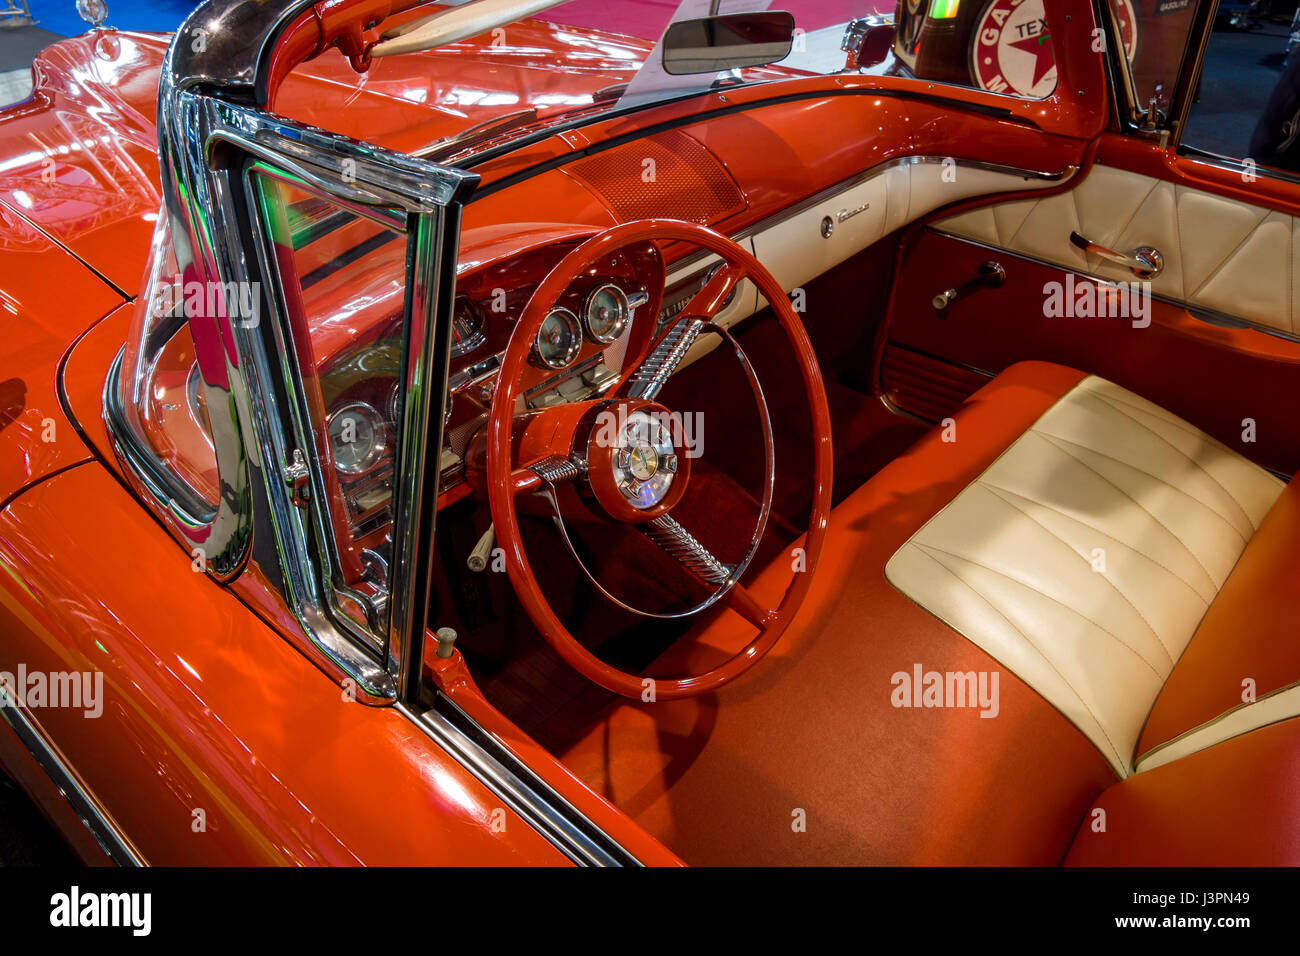 STUTTGART, GERMANY - MARCH 03, 2017: Interior of a full-size car Edsel Pacer Convertible, 1958. Europe's greatest classic car exhibition 'RETRO CLASSICS' Stock Photo